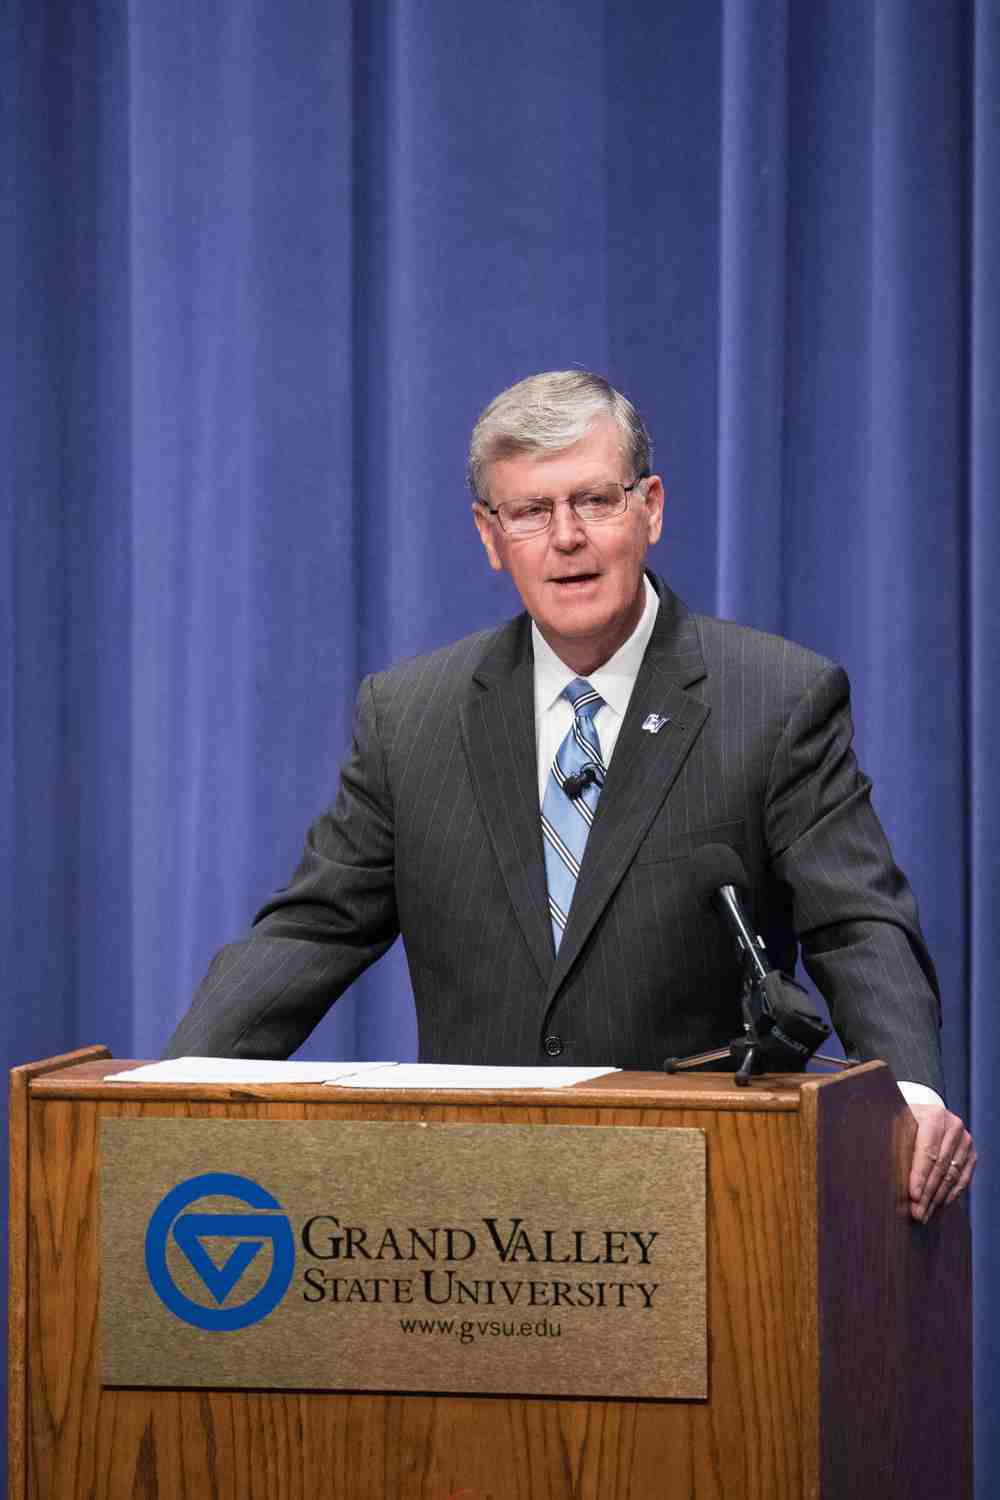 Grand Valley's President Haas announces retirement in 2019